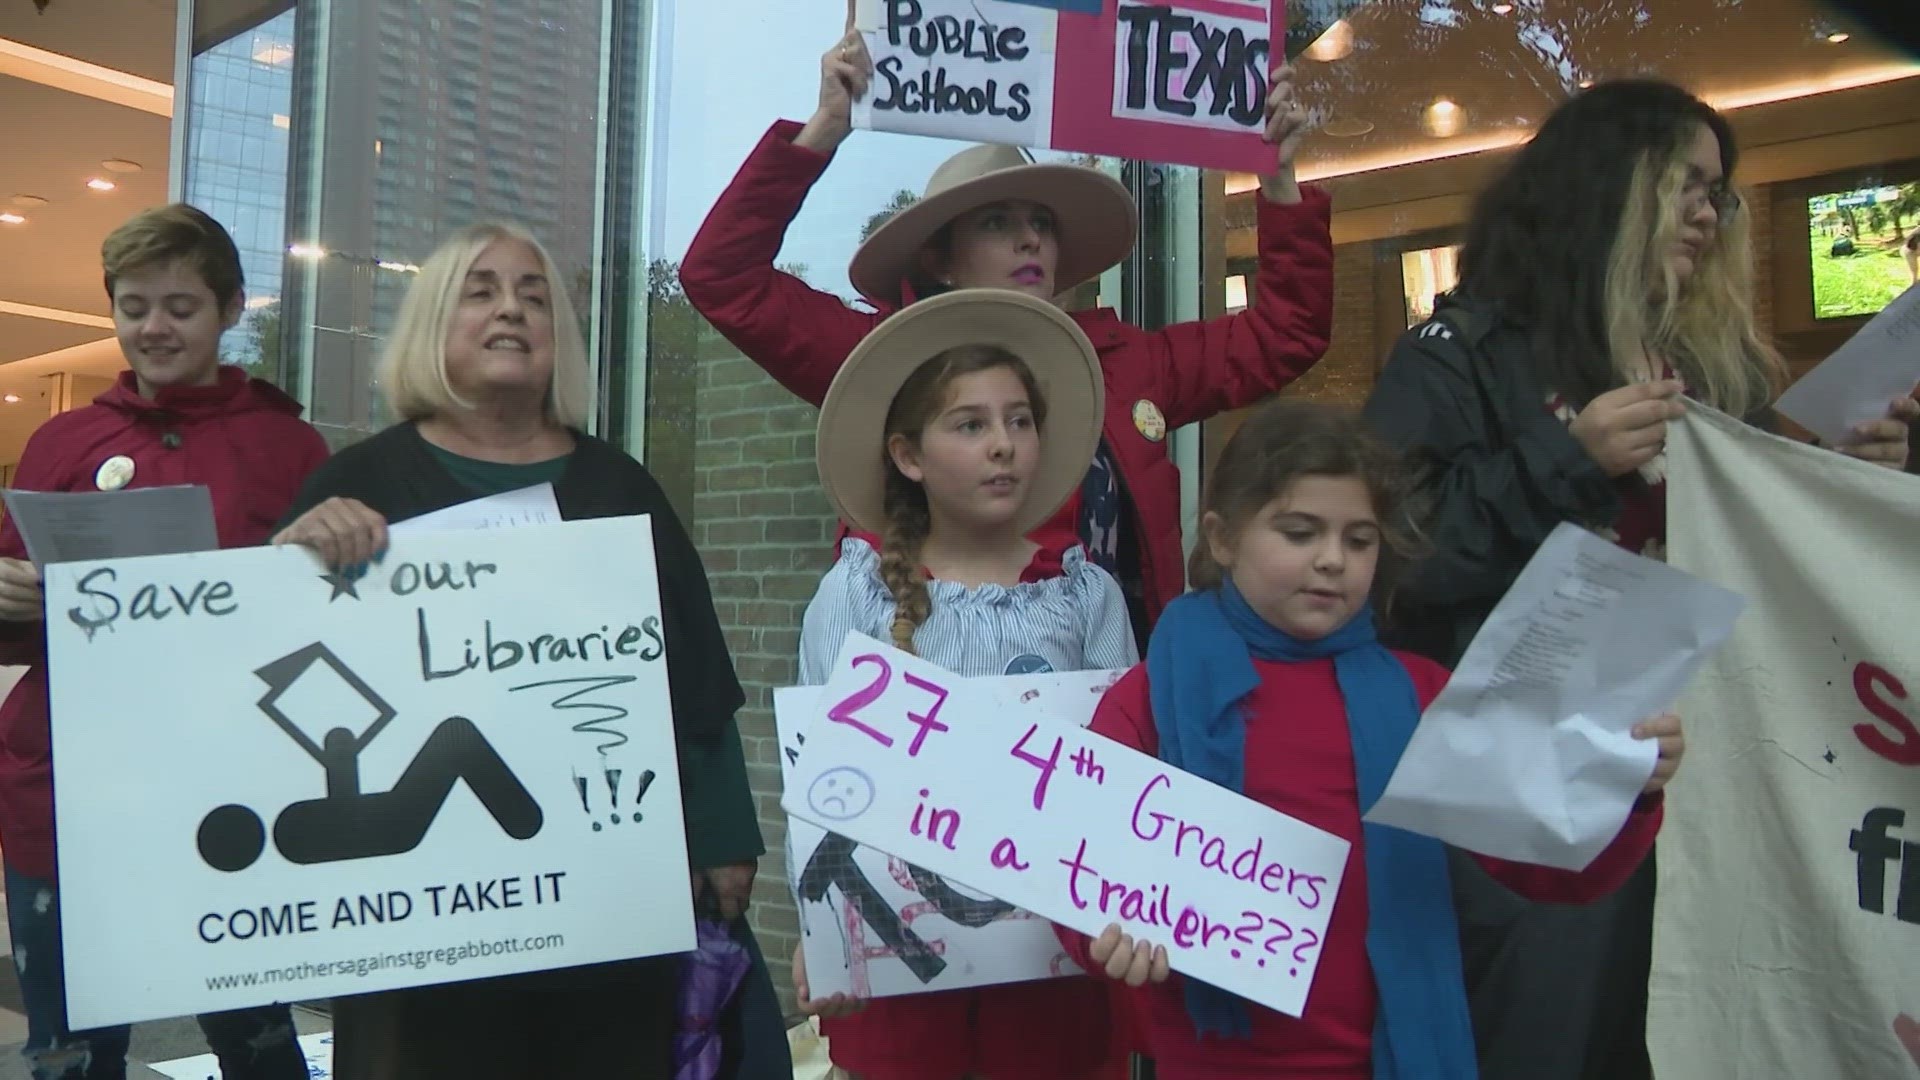 Protesters chanted about what they believe the state takeover of HISD has done all while Superintendent Mike Miles said that the takeover could last another 5 years.